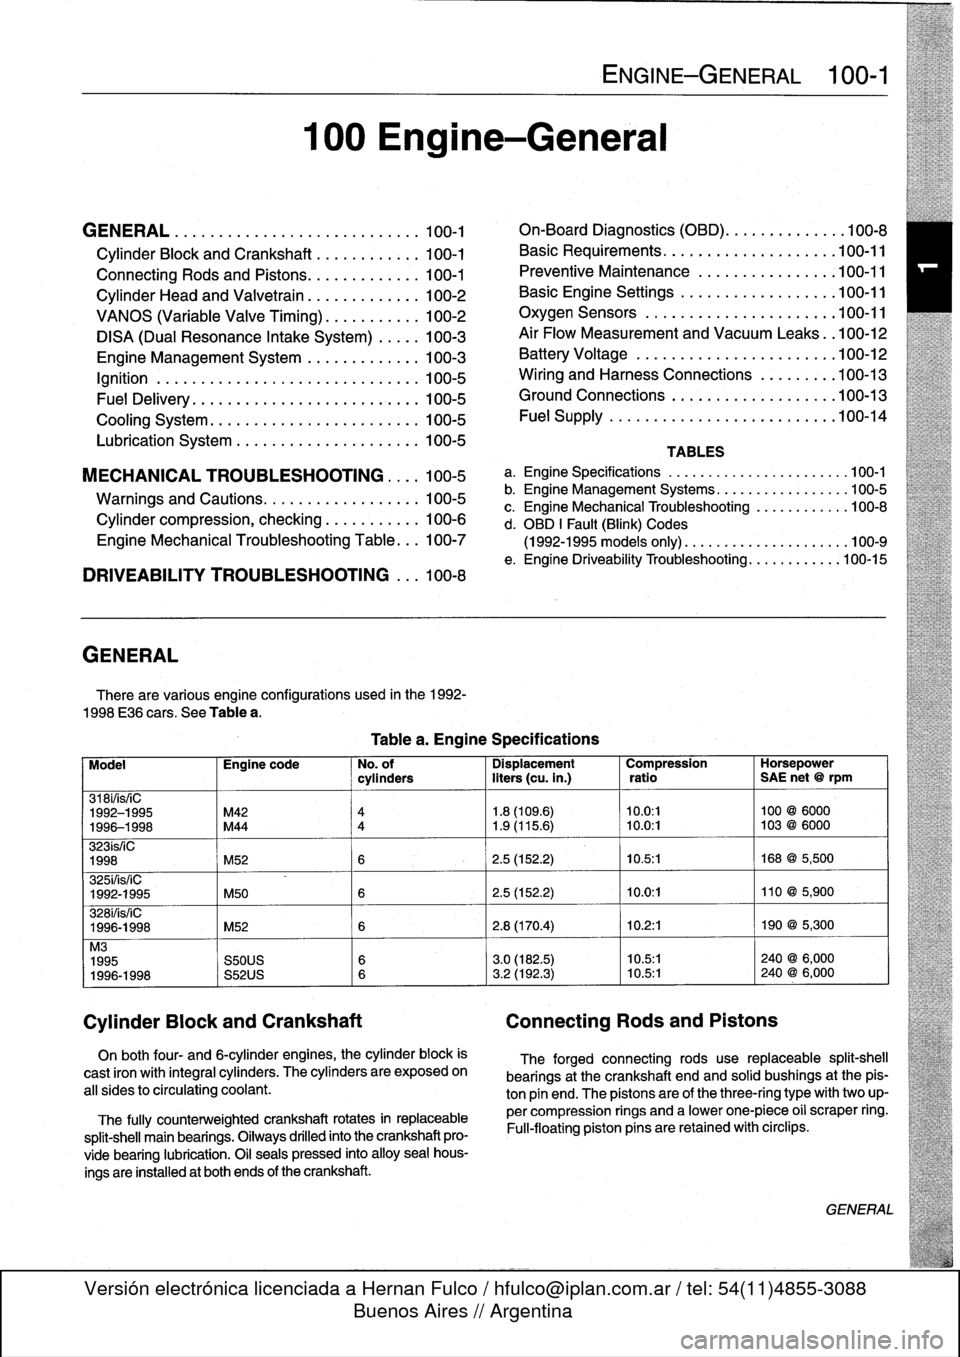 BMW 328i 1997 E36 Workshop Manual 
GENERAL
.
.....
.
.
.
.
.
.
.
...
.
.
.
.
.
.
.
.
.
...
100-1

Cylinder
Block
and
Crankshaft
.
.
.
.
.
.
.
.
.
...
100-1

Connecting
Rods
and
Pistons
.
.
.
.
.
.
.
.
.
.
.
.
.
100-1

Cylinder
Head
an